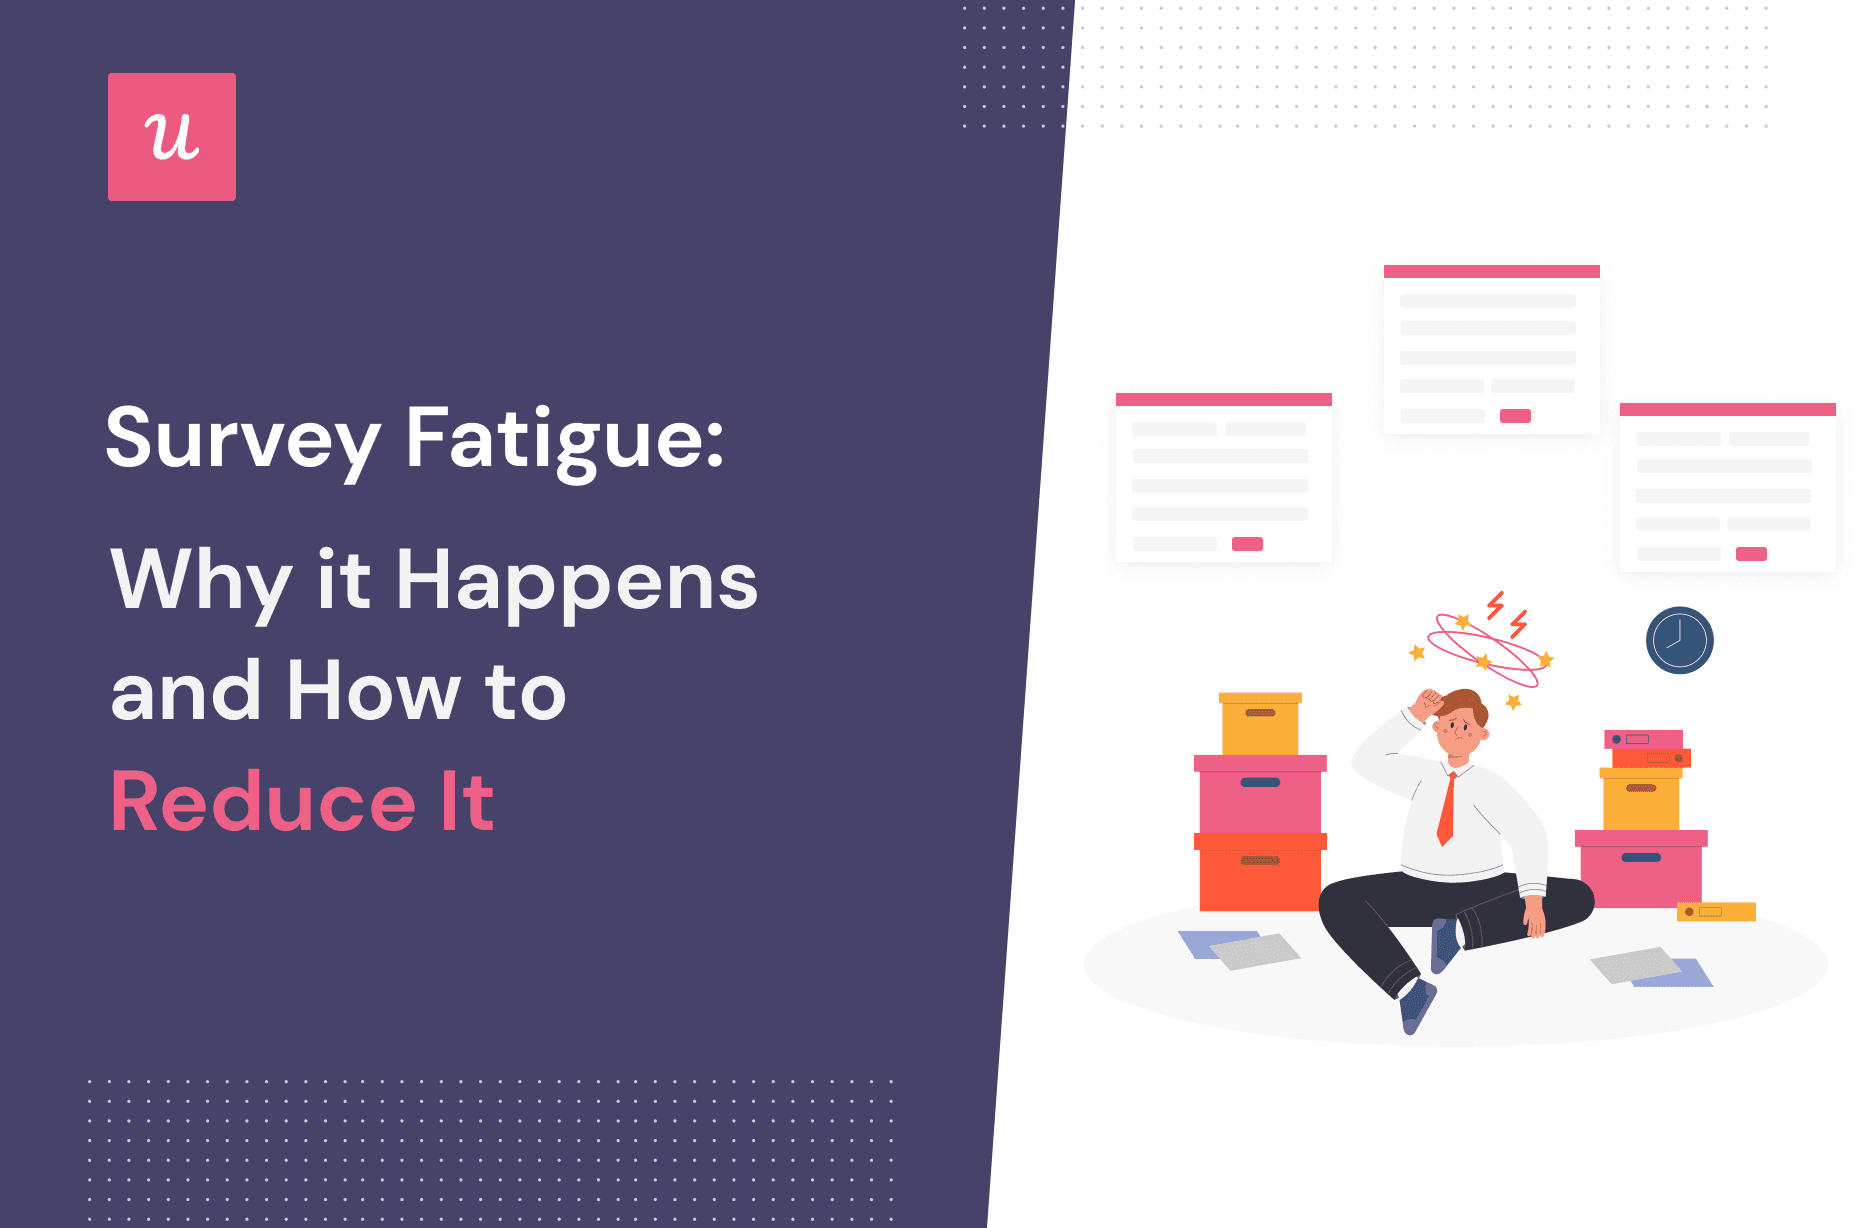 Survey Fatigue: Why it Happens and How to Reduce It